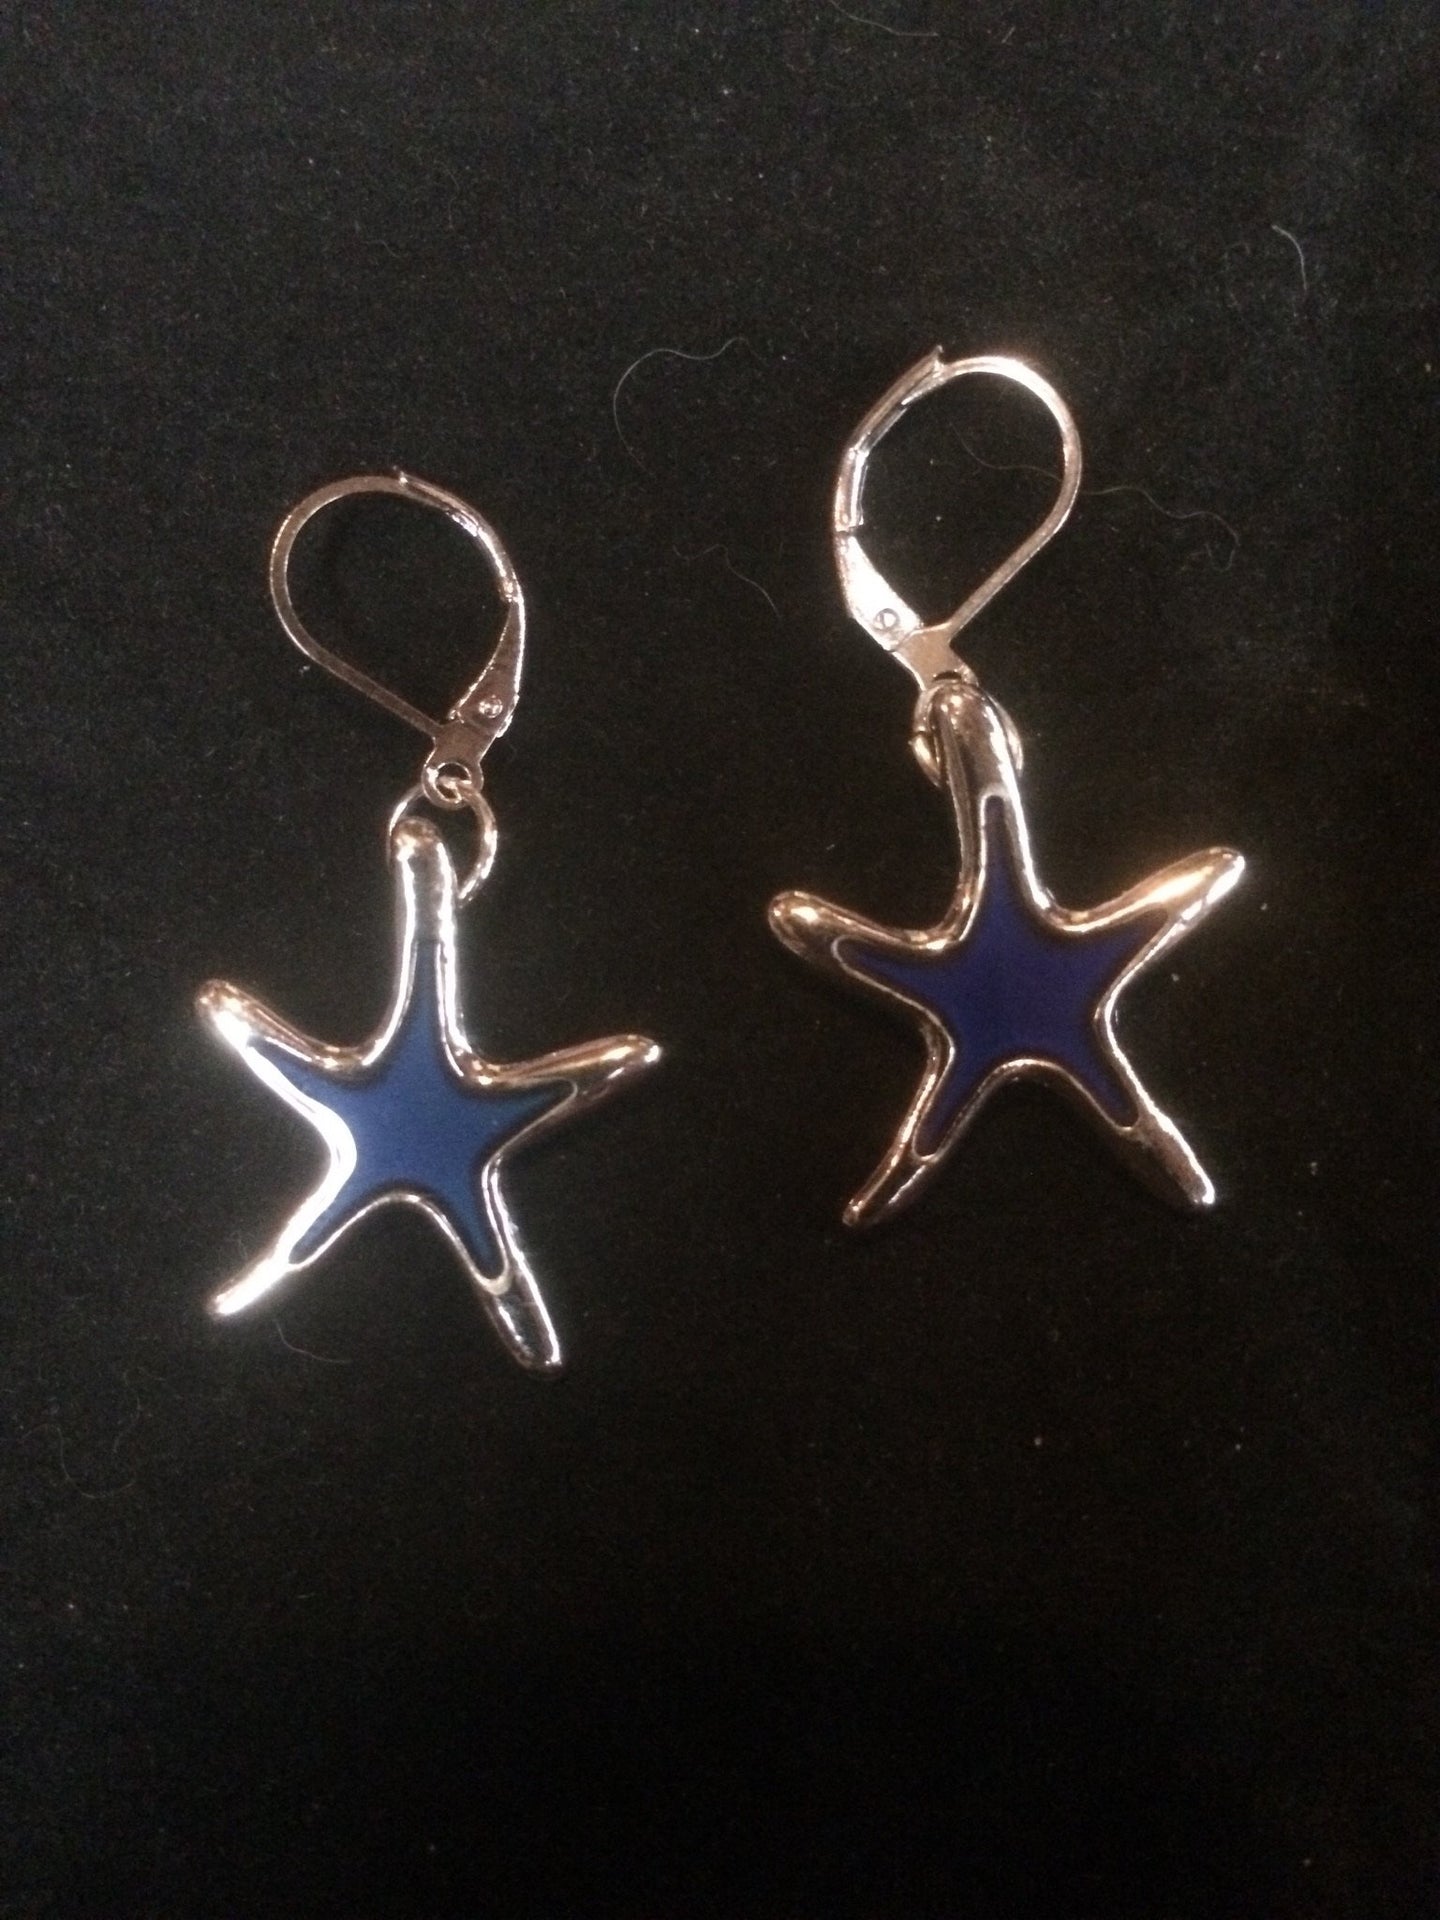 A pair of silver plated sea star beads that change color with temperature sits below silver plated brass leverbacks.